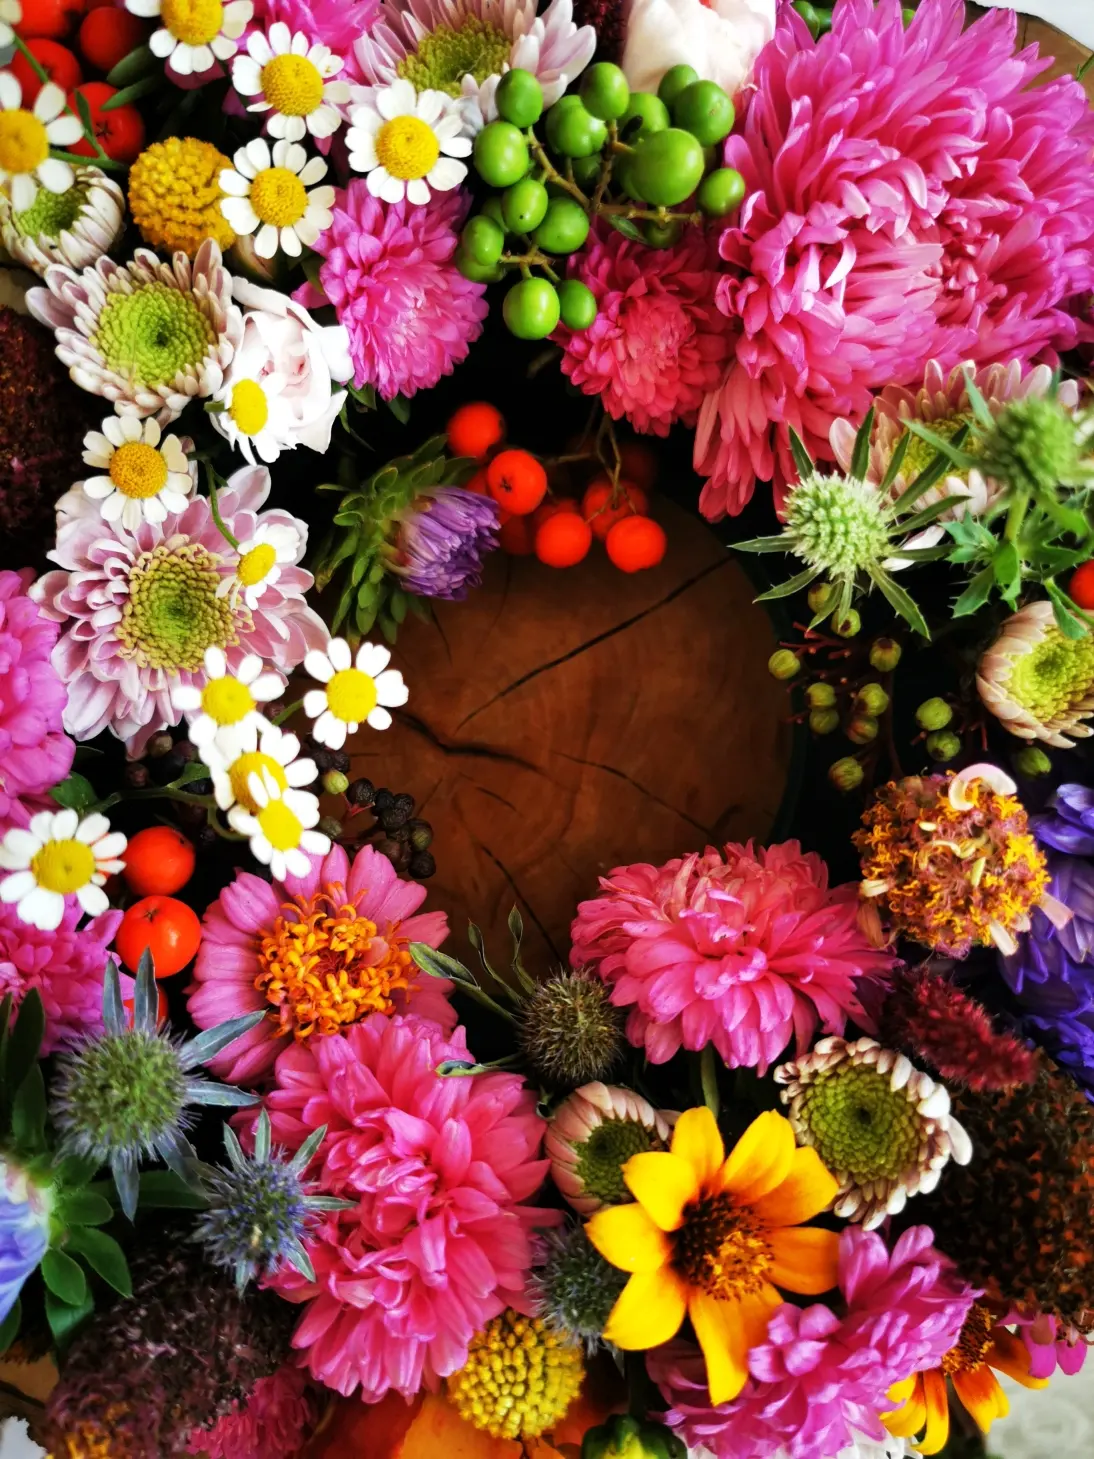 A colourful composition of fresh cut flowers, vibrant with the energy of summer.